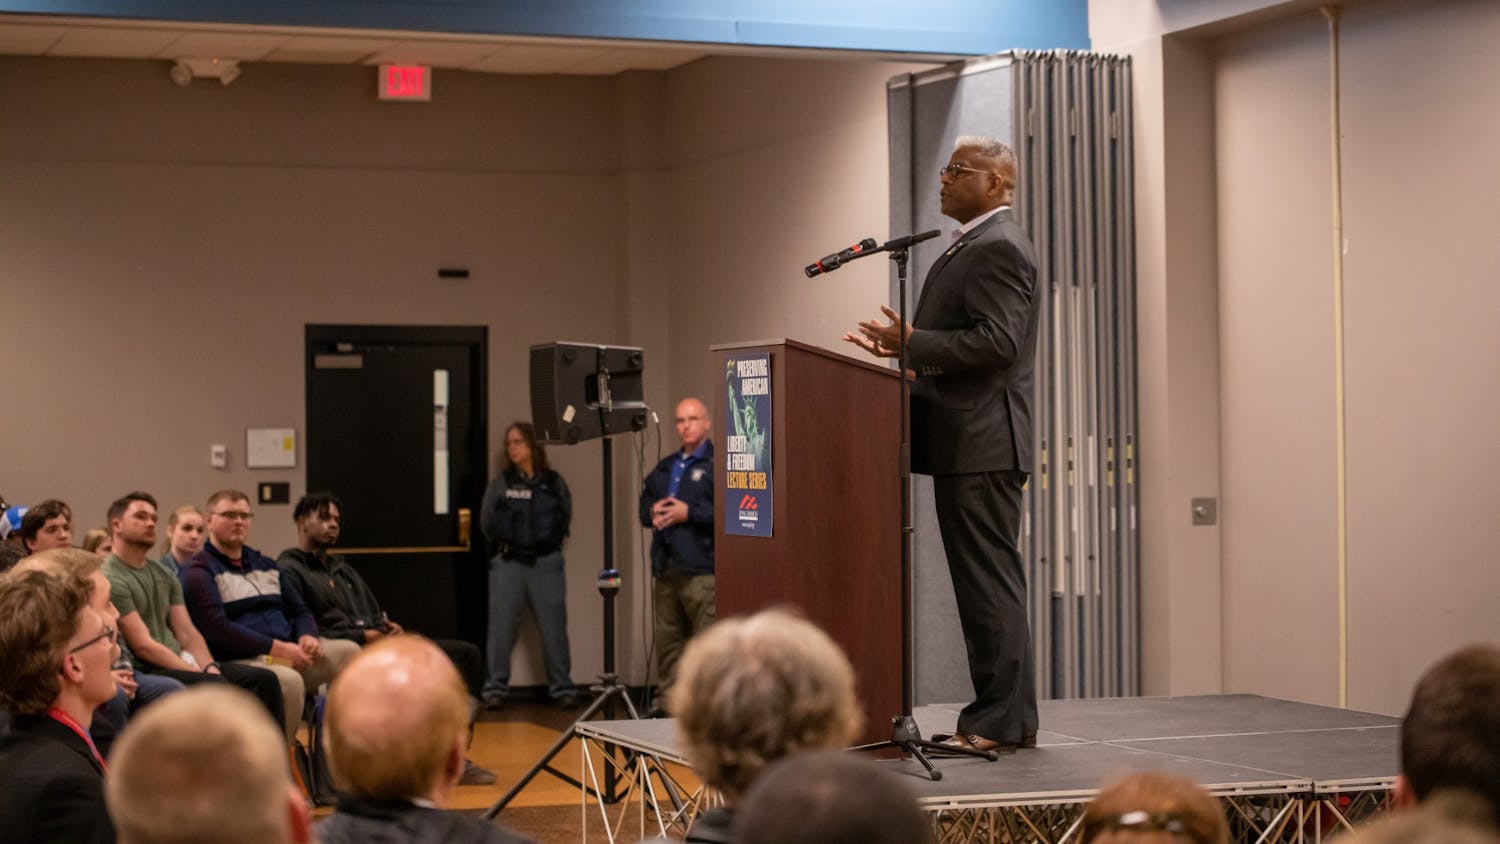 UPD has not filed any charges in connection with the events following Allen West's speech in April.